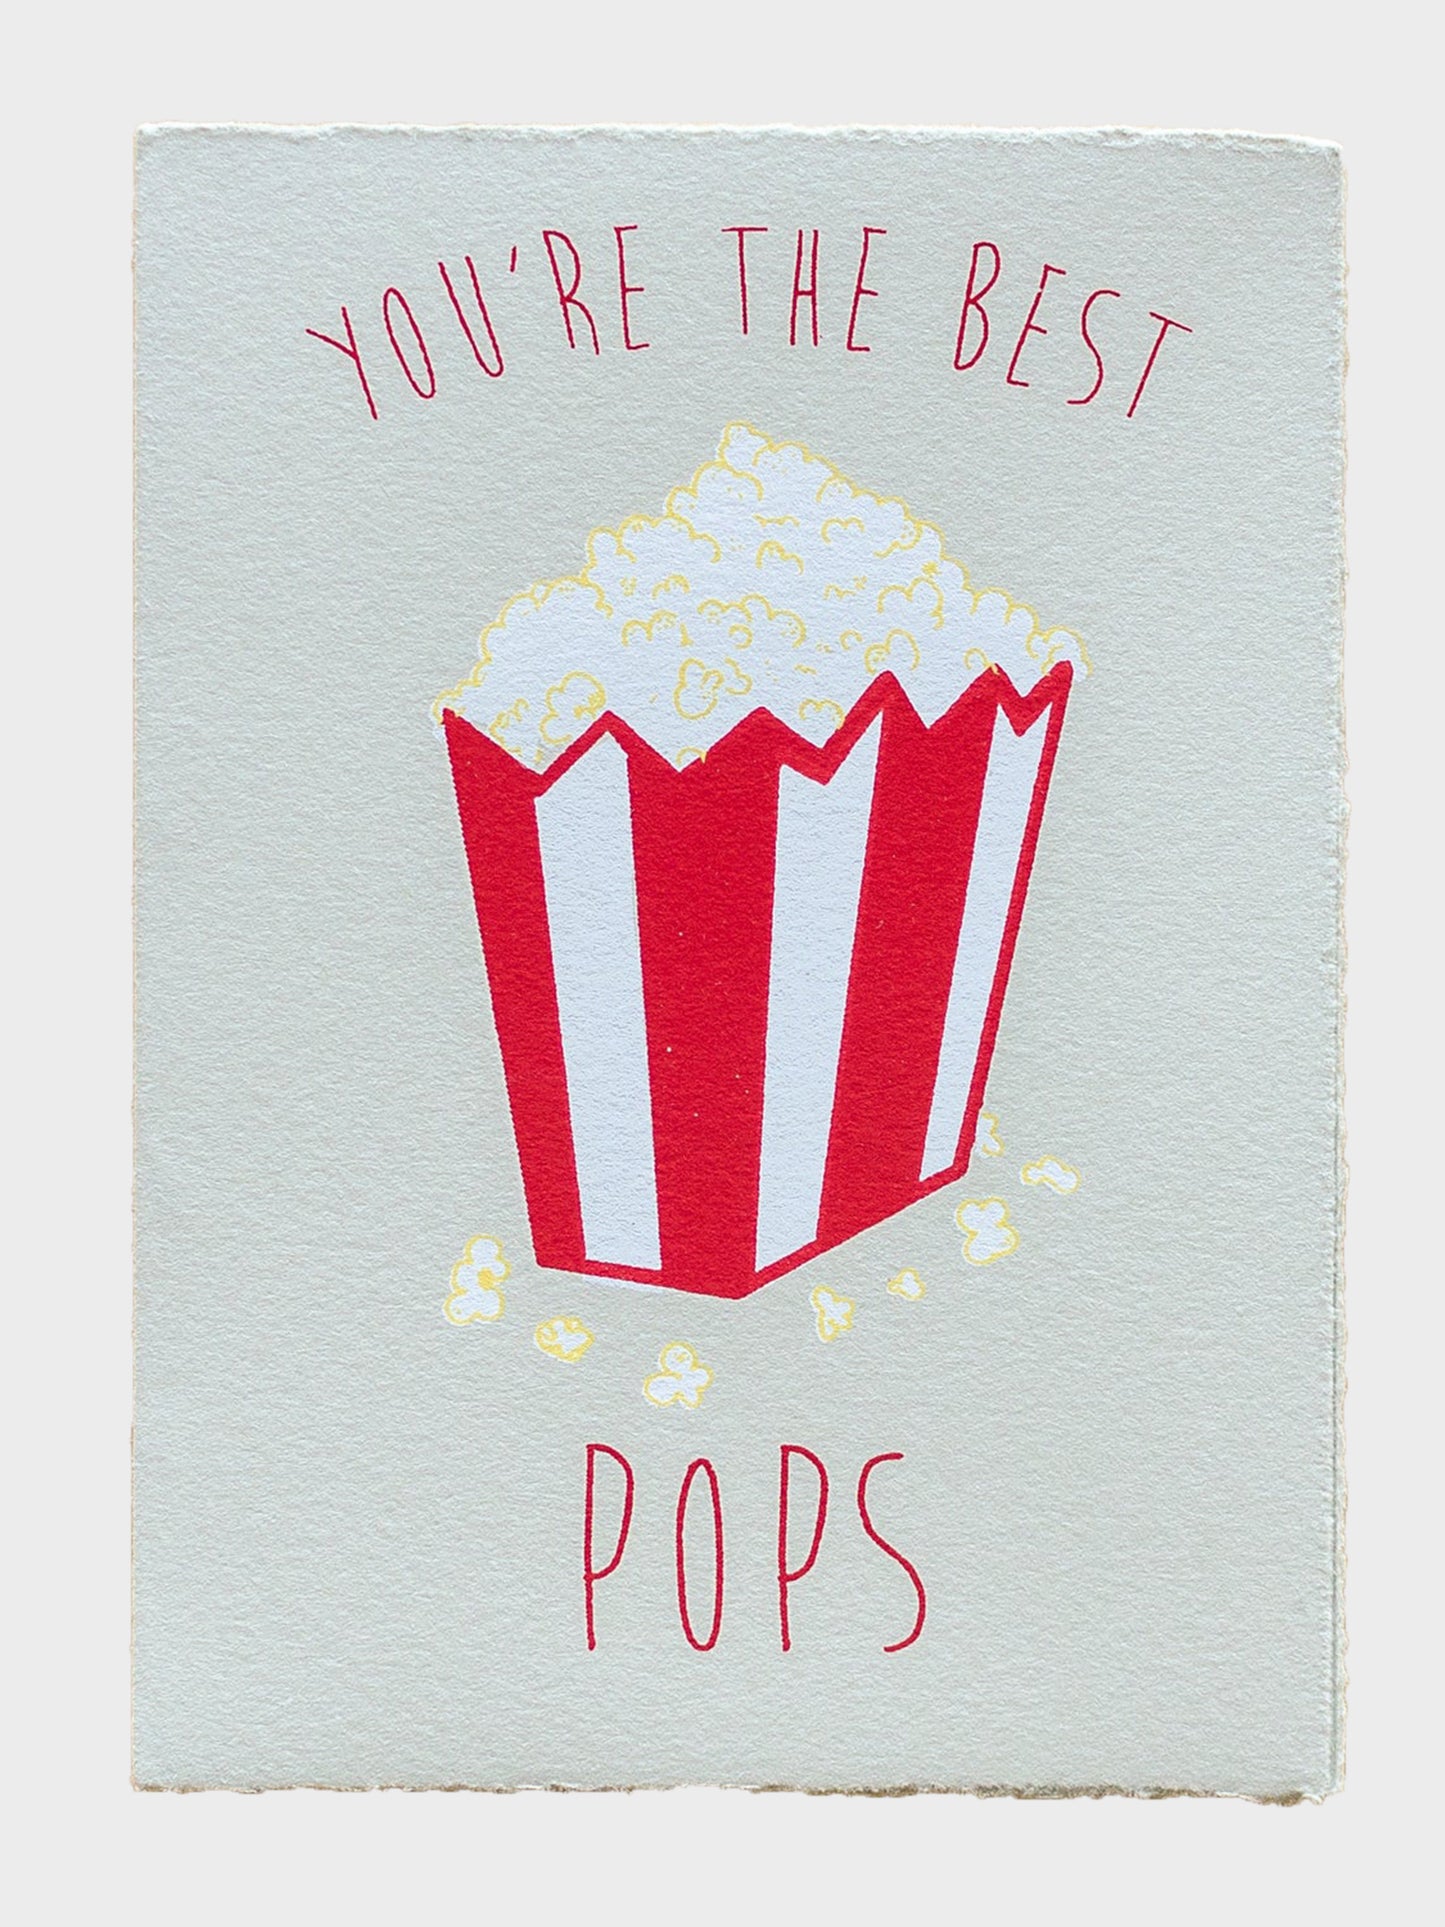 Gold Teeth Brooklyn You're The Best Pops Greeting Card